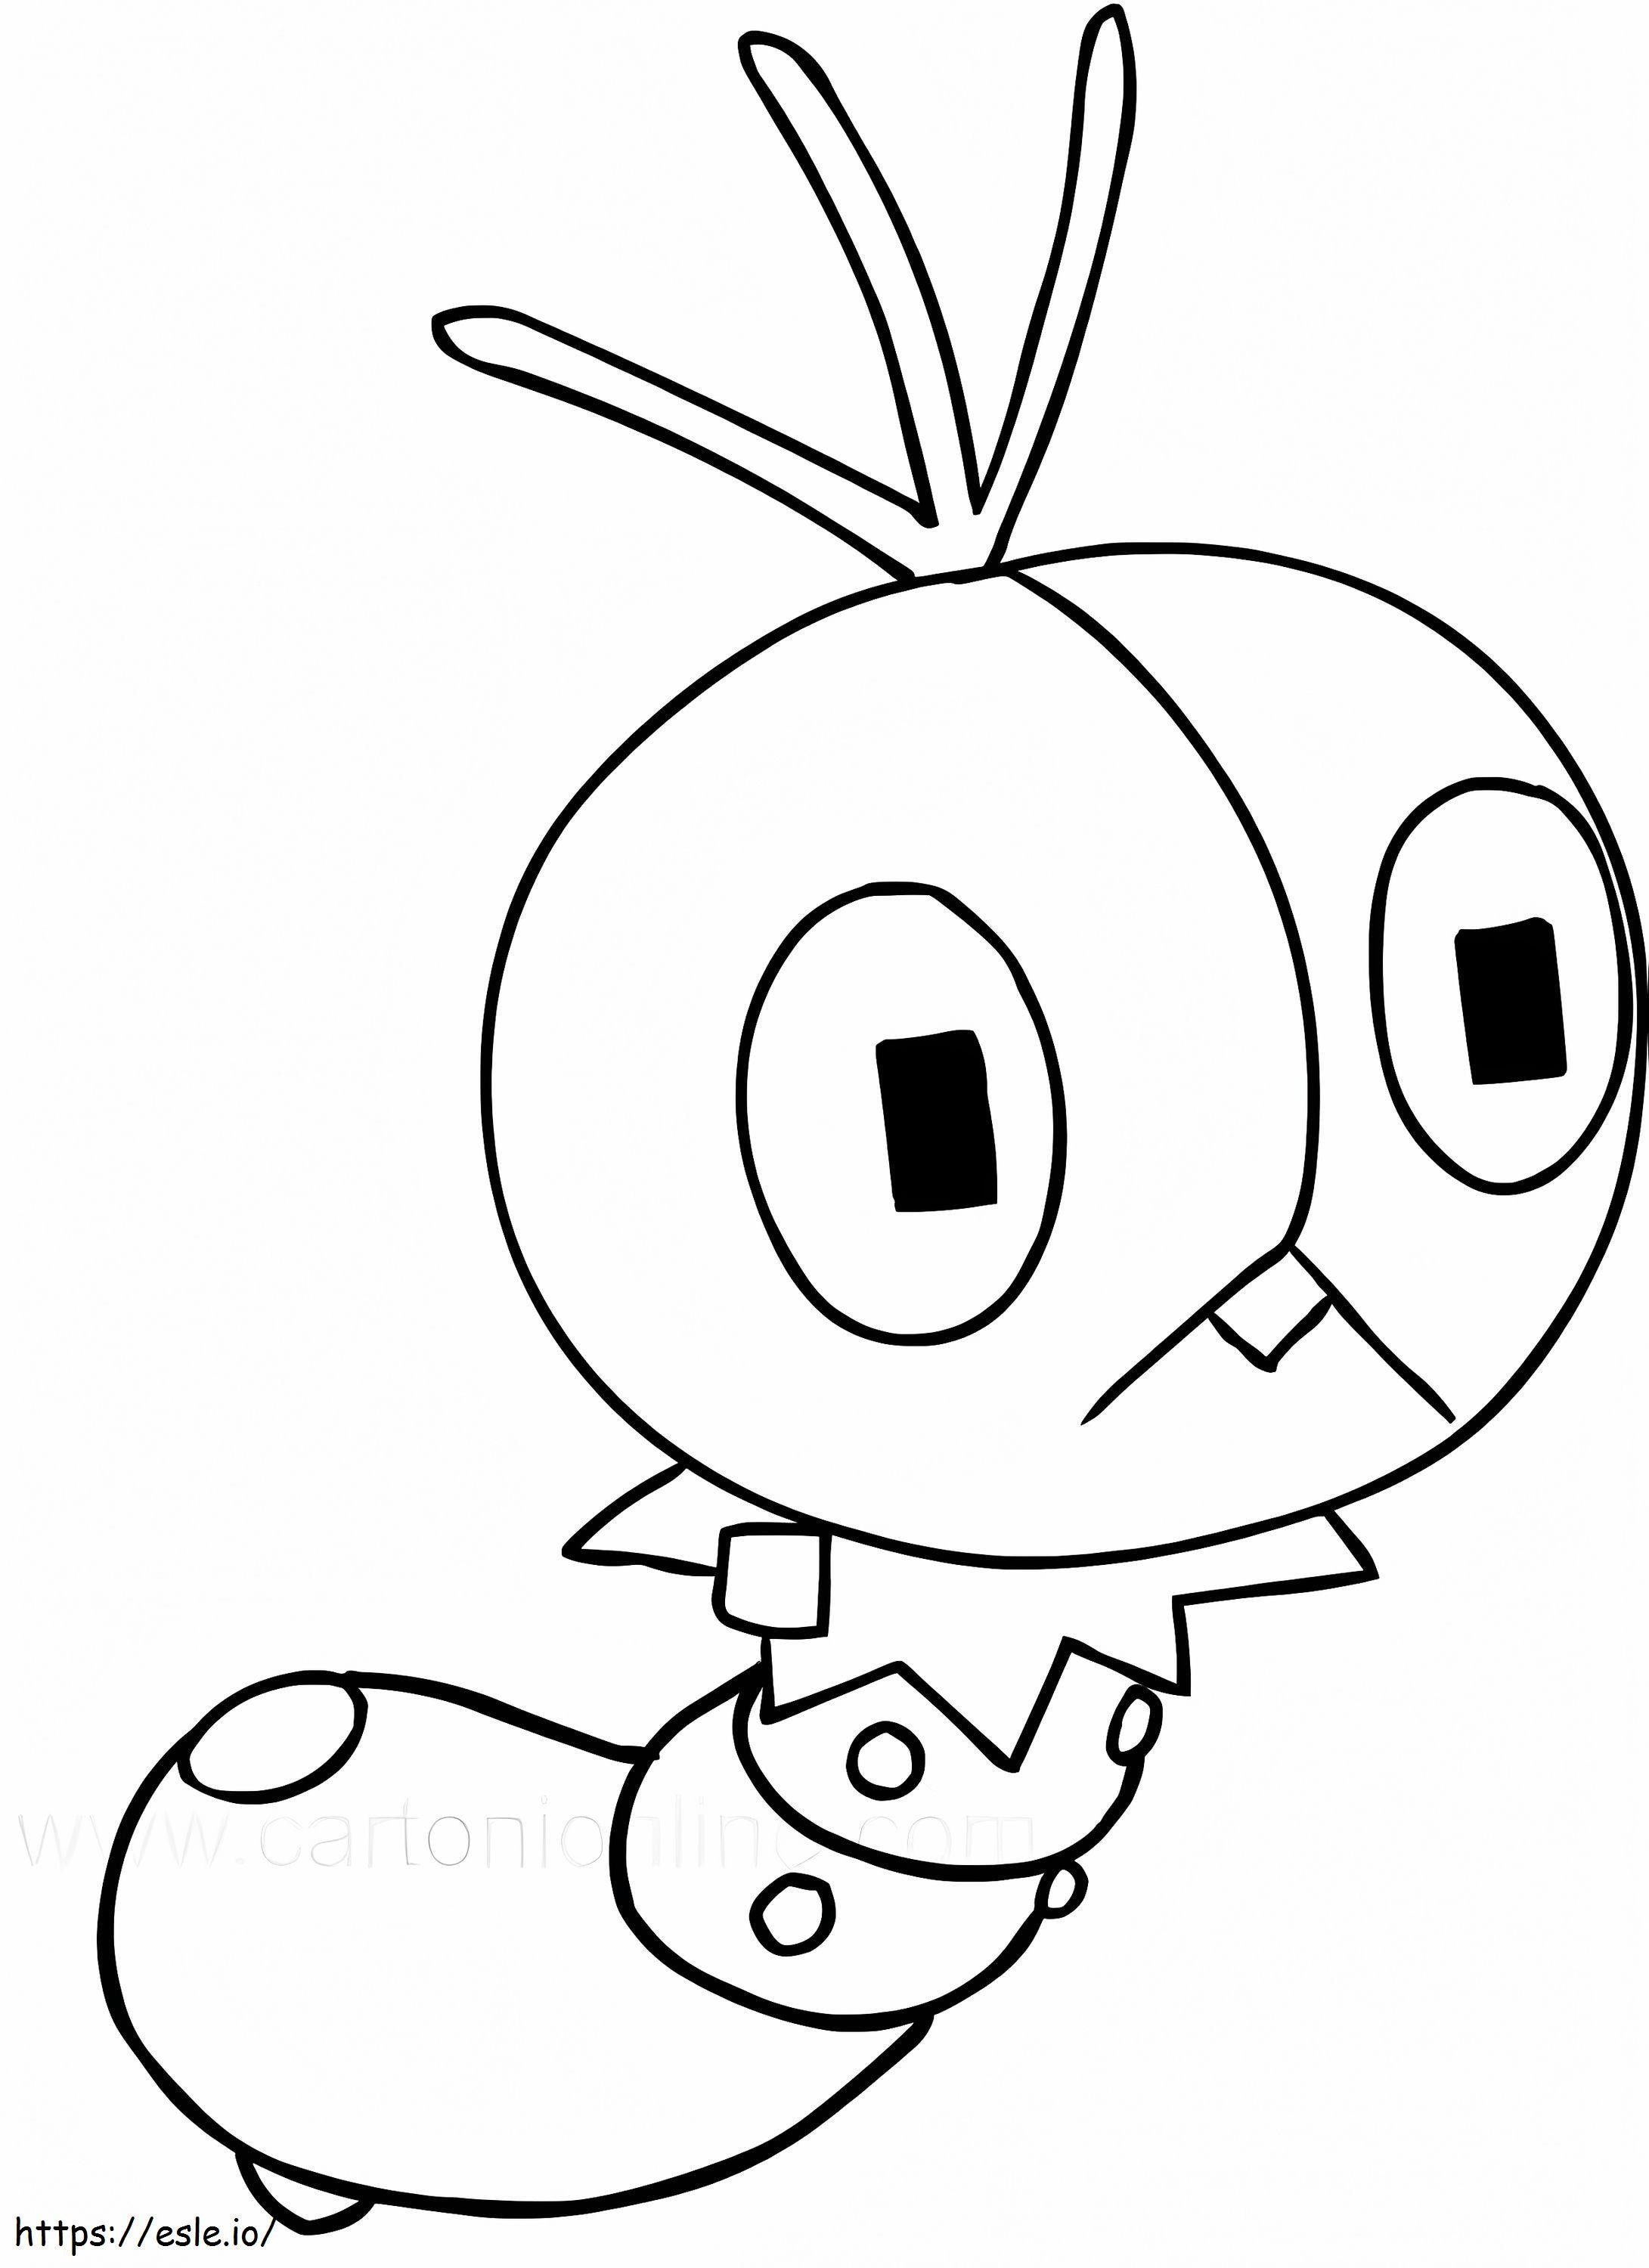 Scatterbug Pokemon coloring page